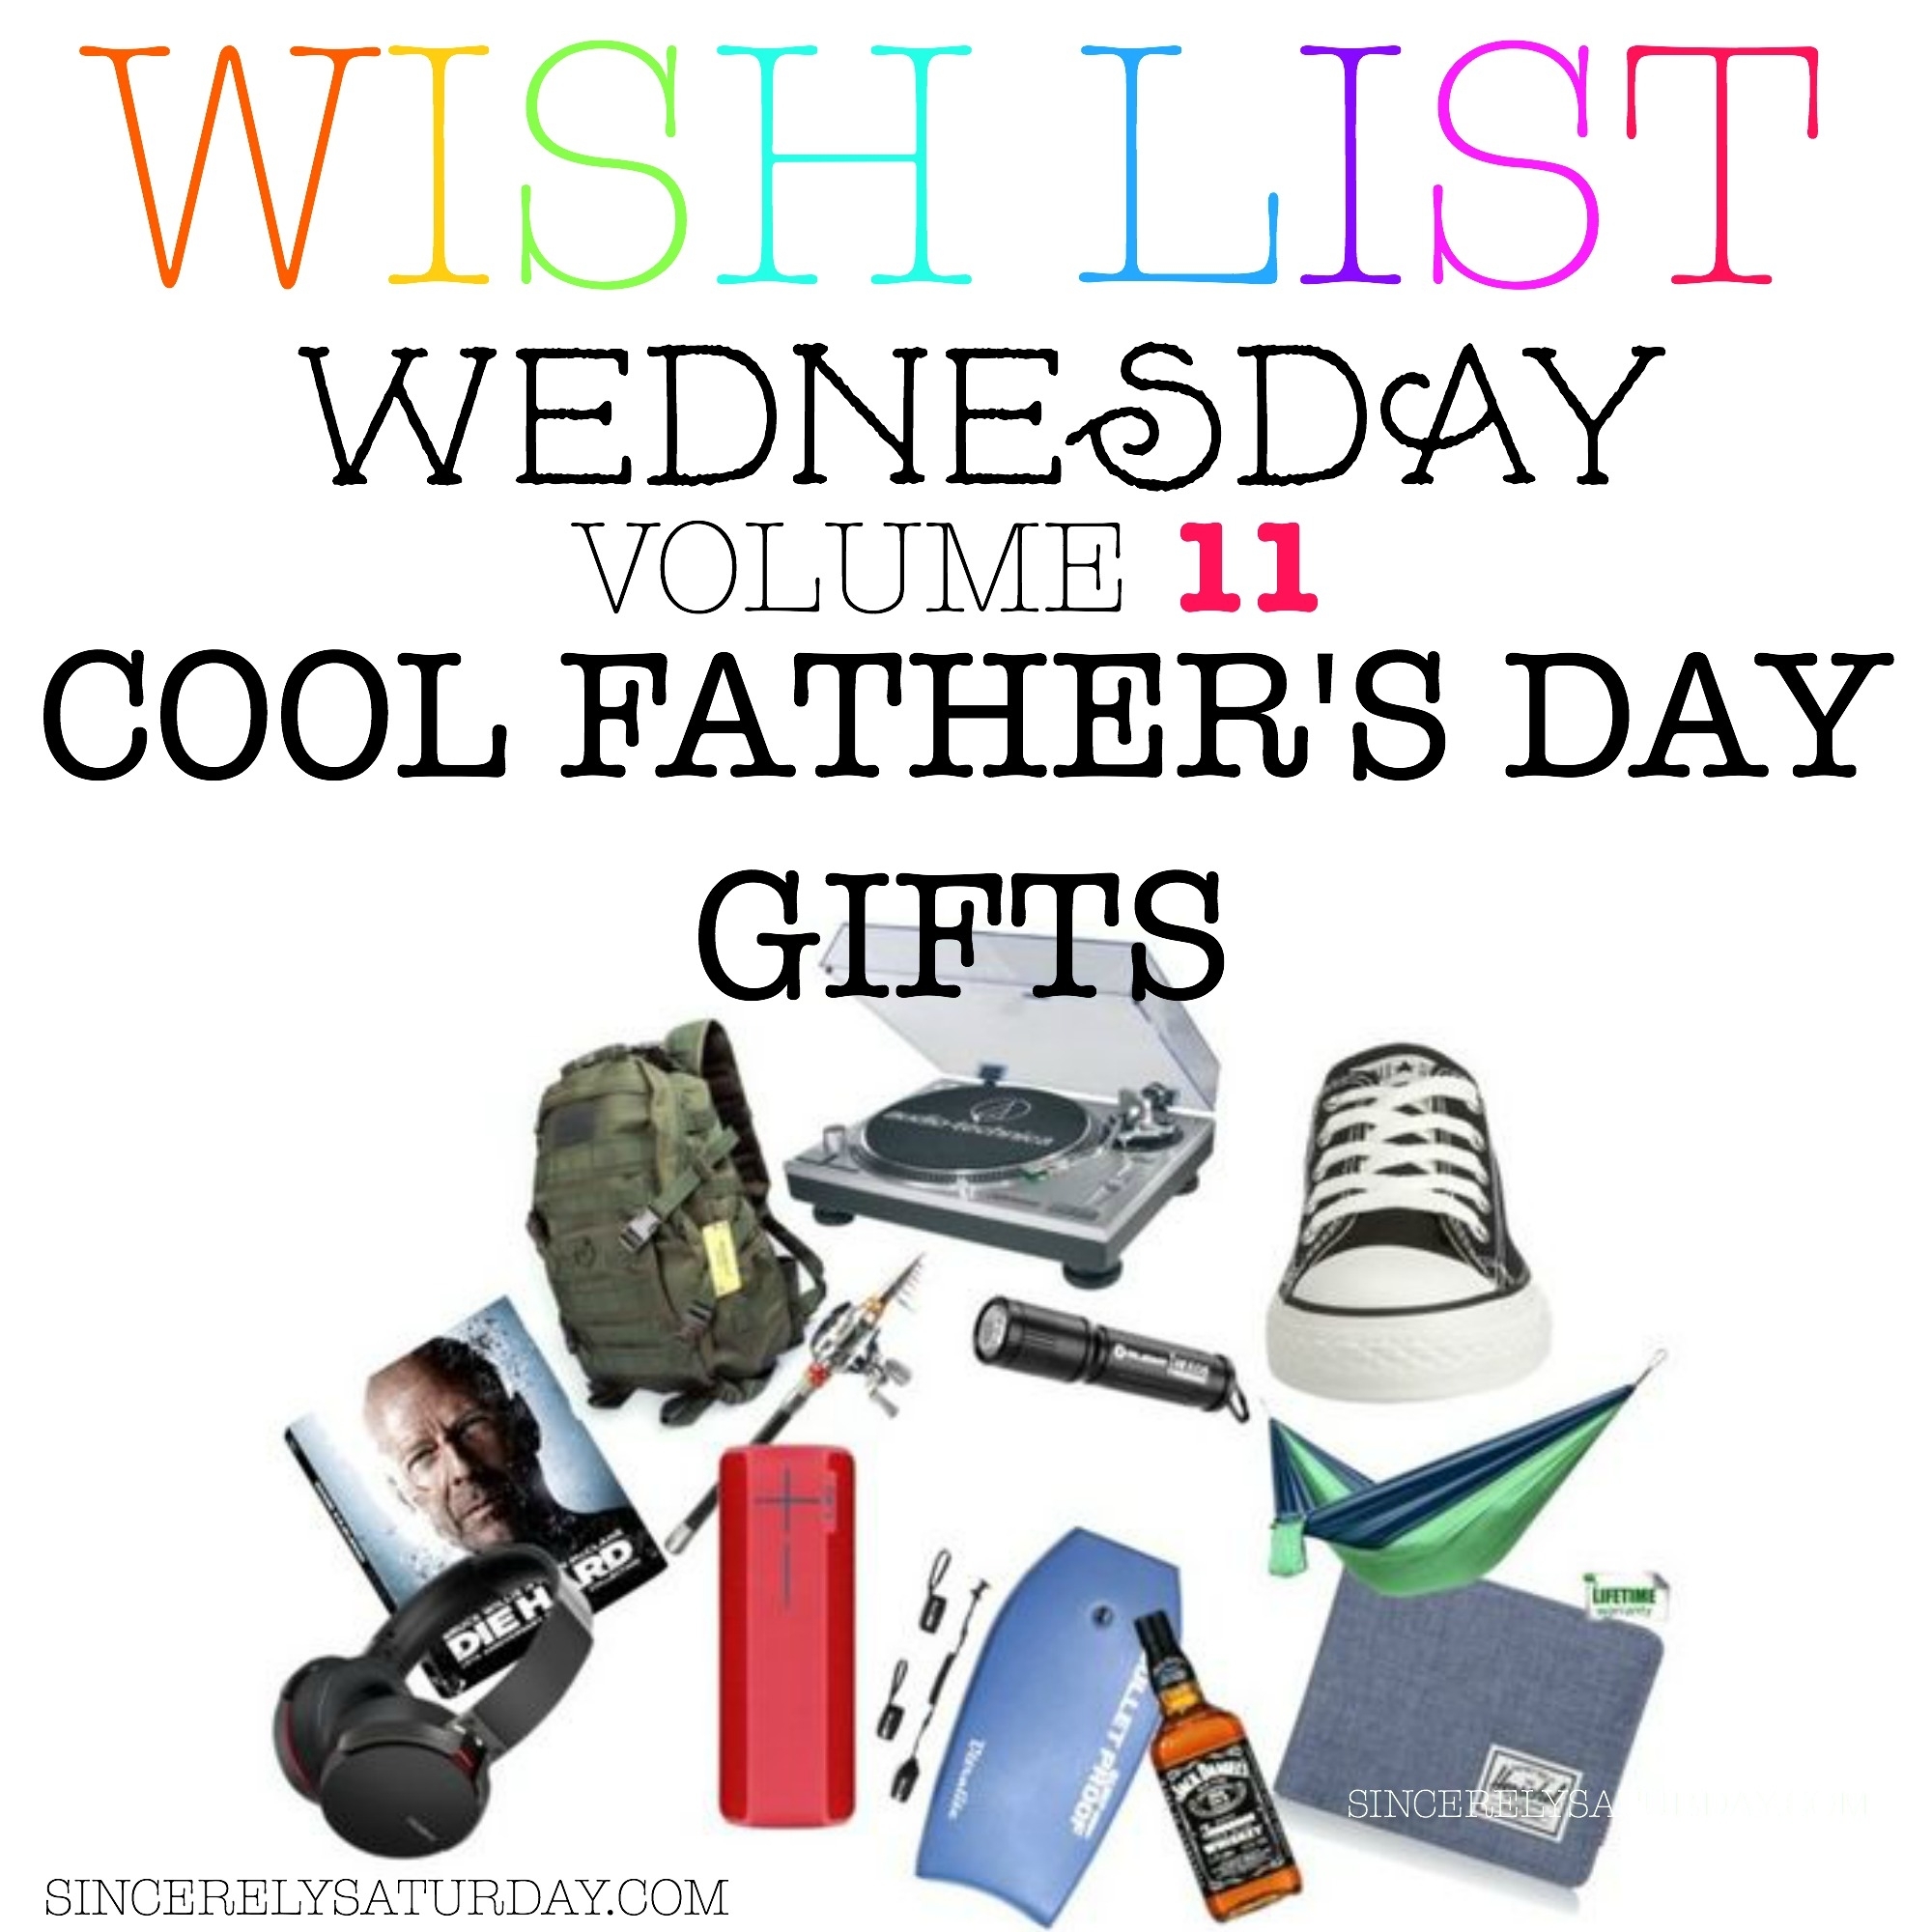 COOL FATHER'S DAY GIFTS - WISH LIST WEDNESDAY #11